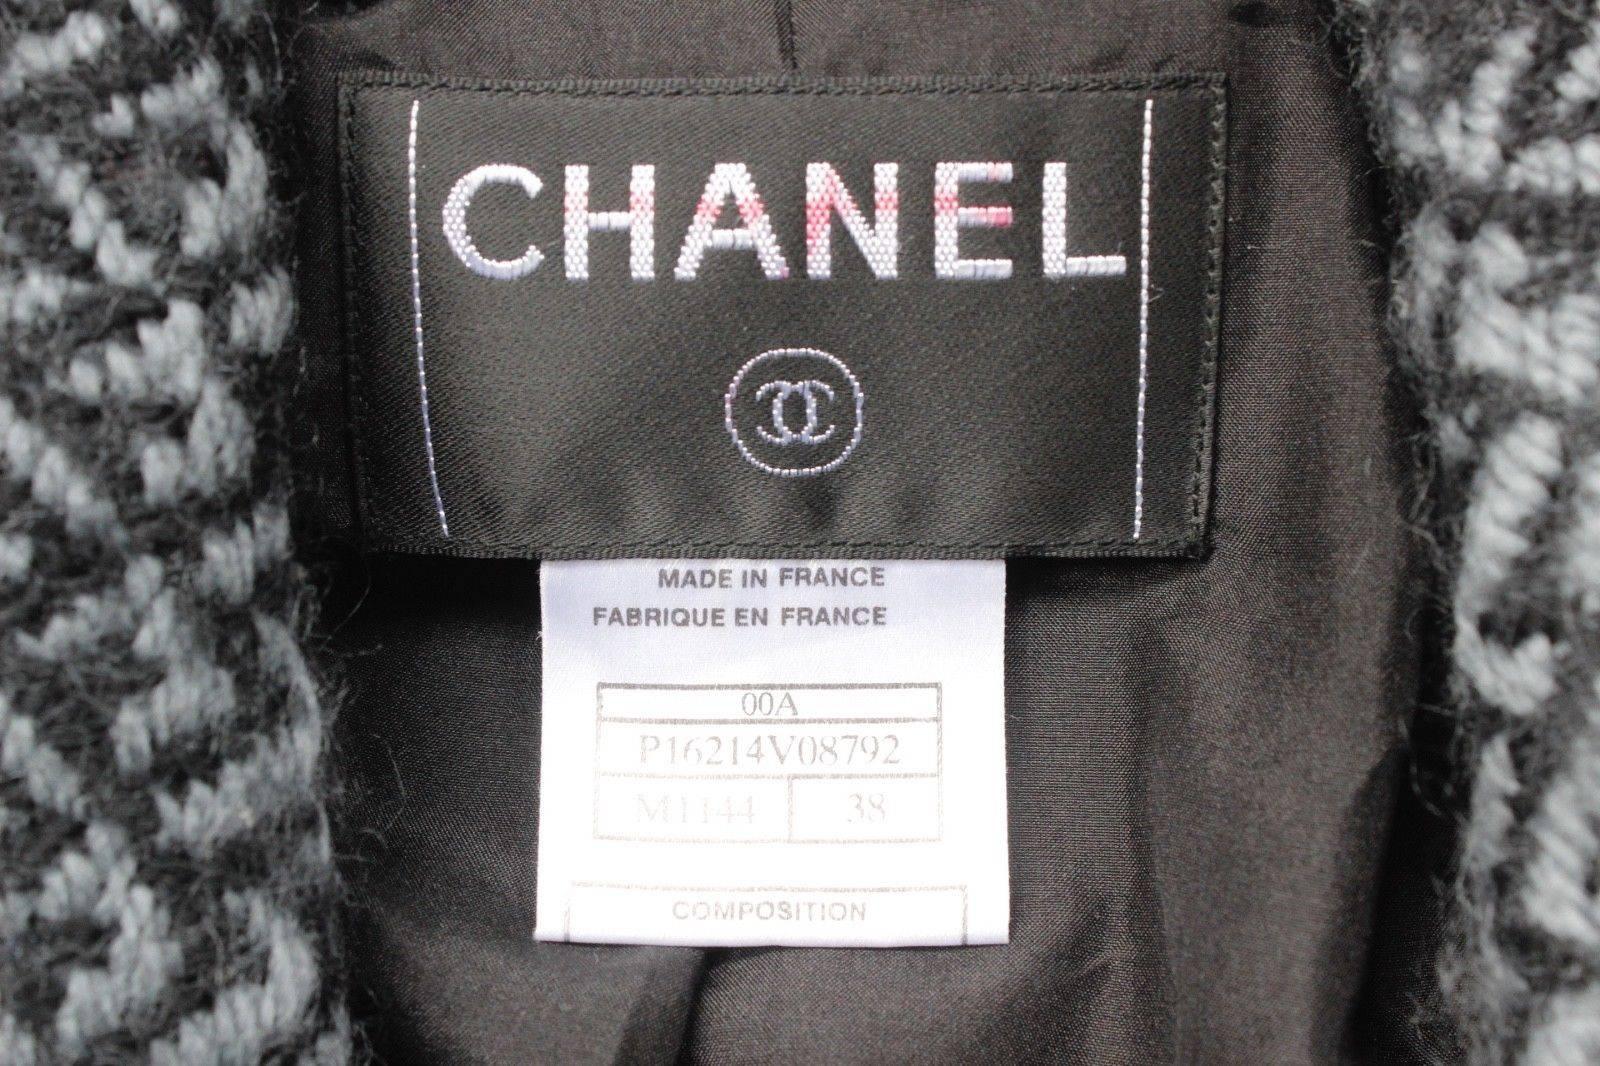 Authentic Chanel Blue Chevron Wool Sequin Jacket F 38 uk 10  For Sale 4